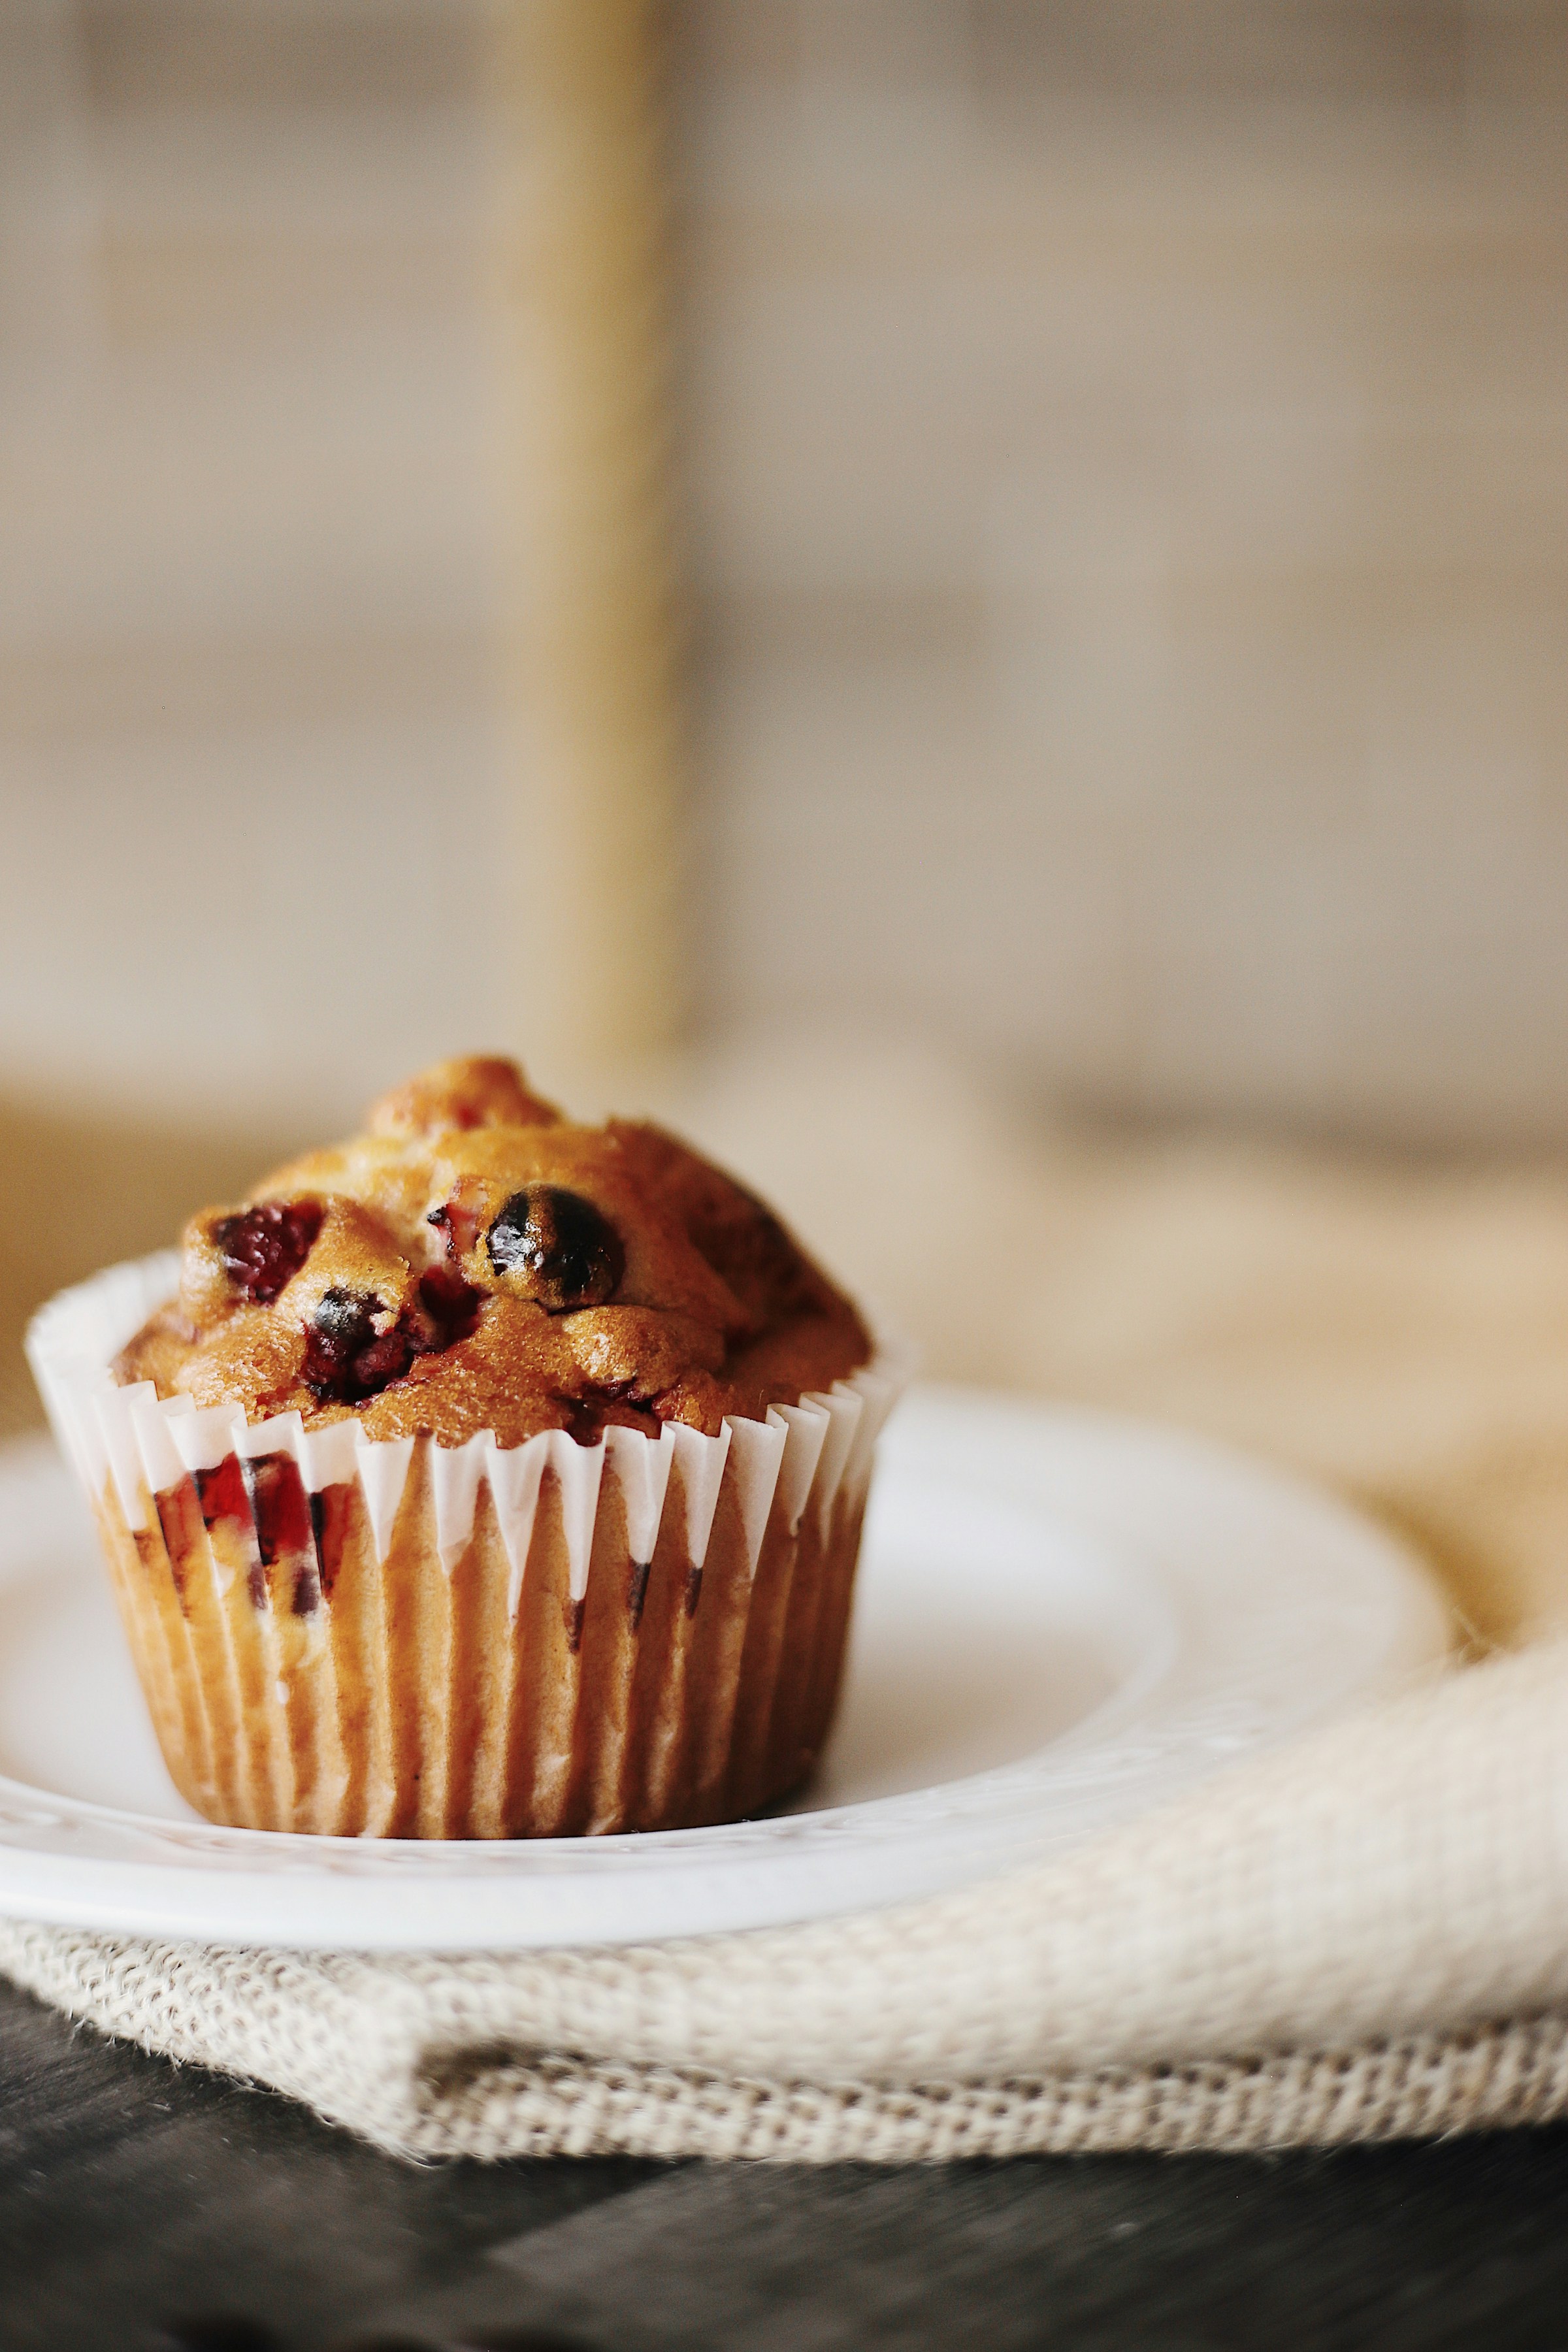 A muffin on a plate | Source: Unsplash